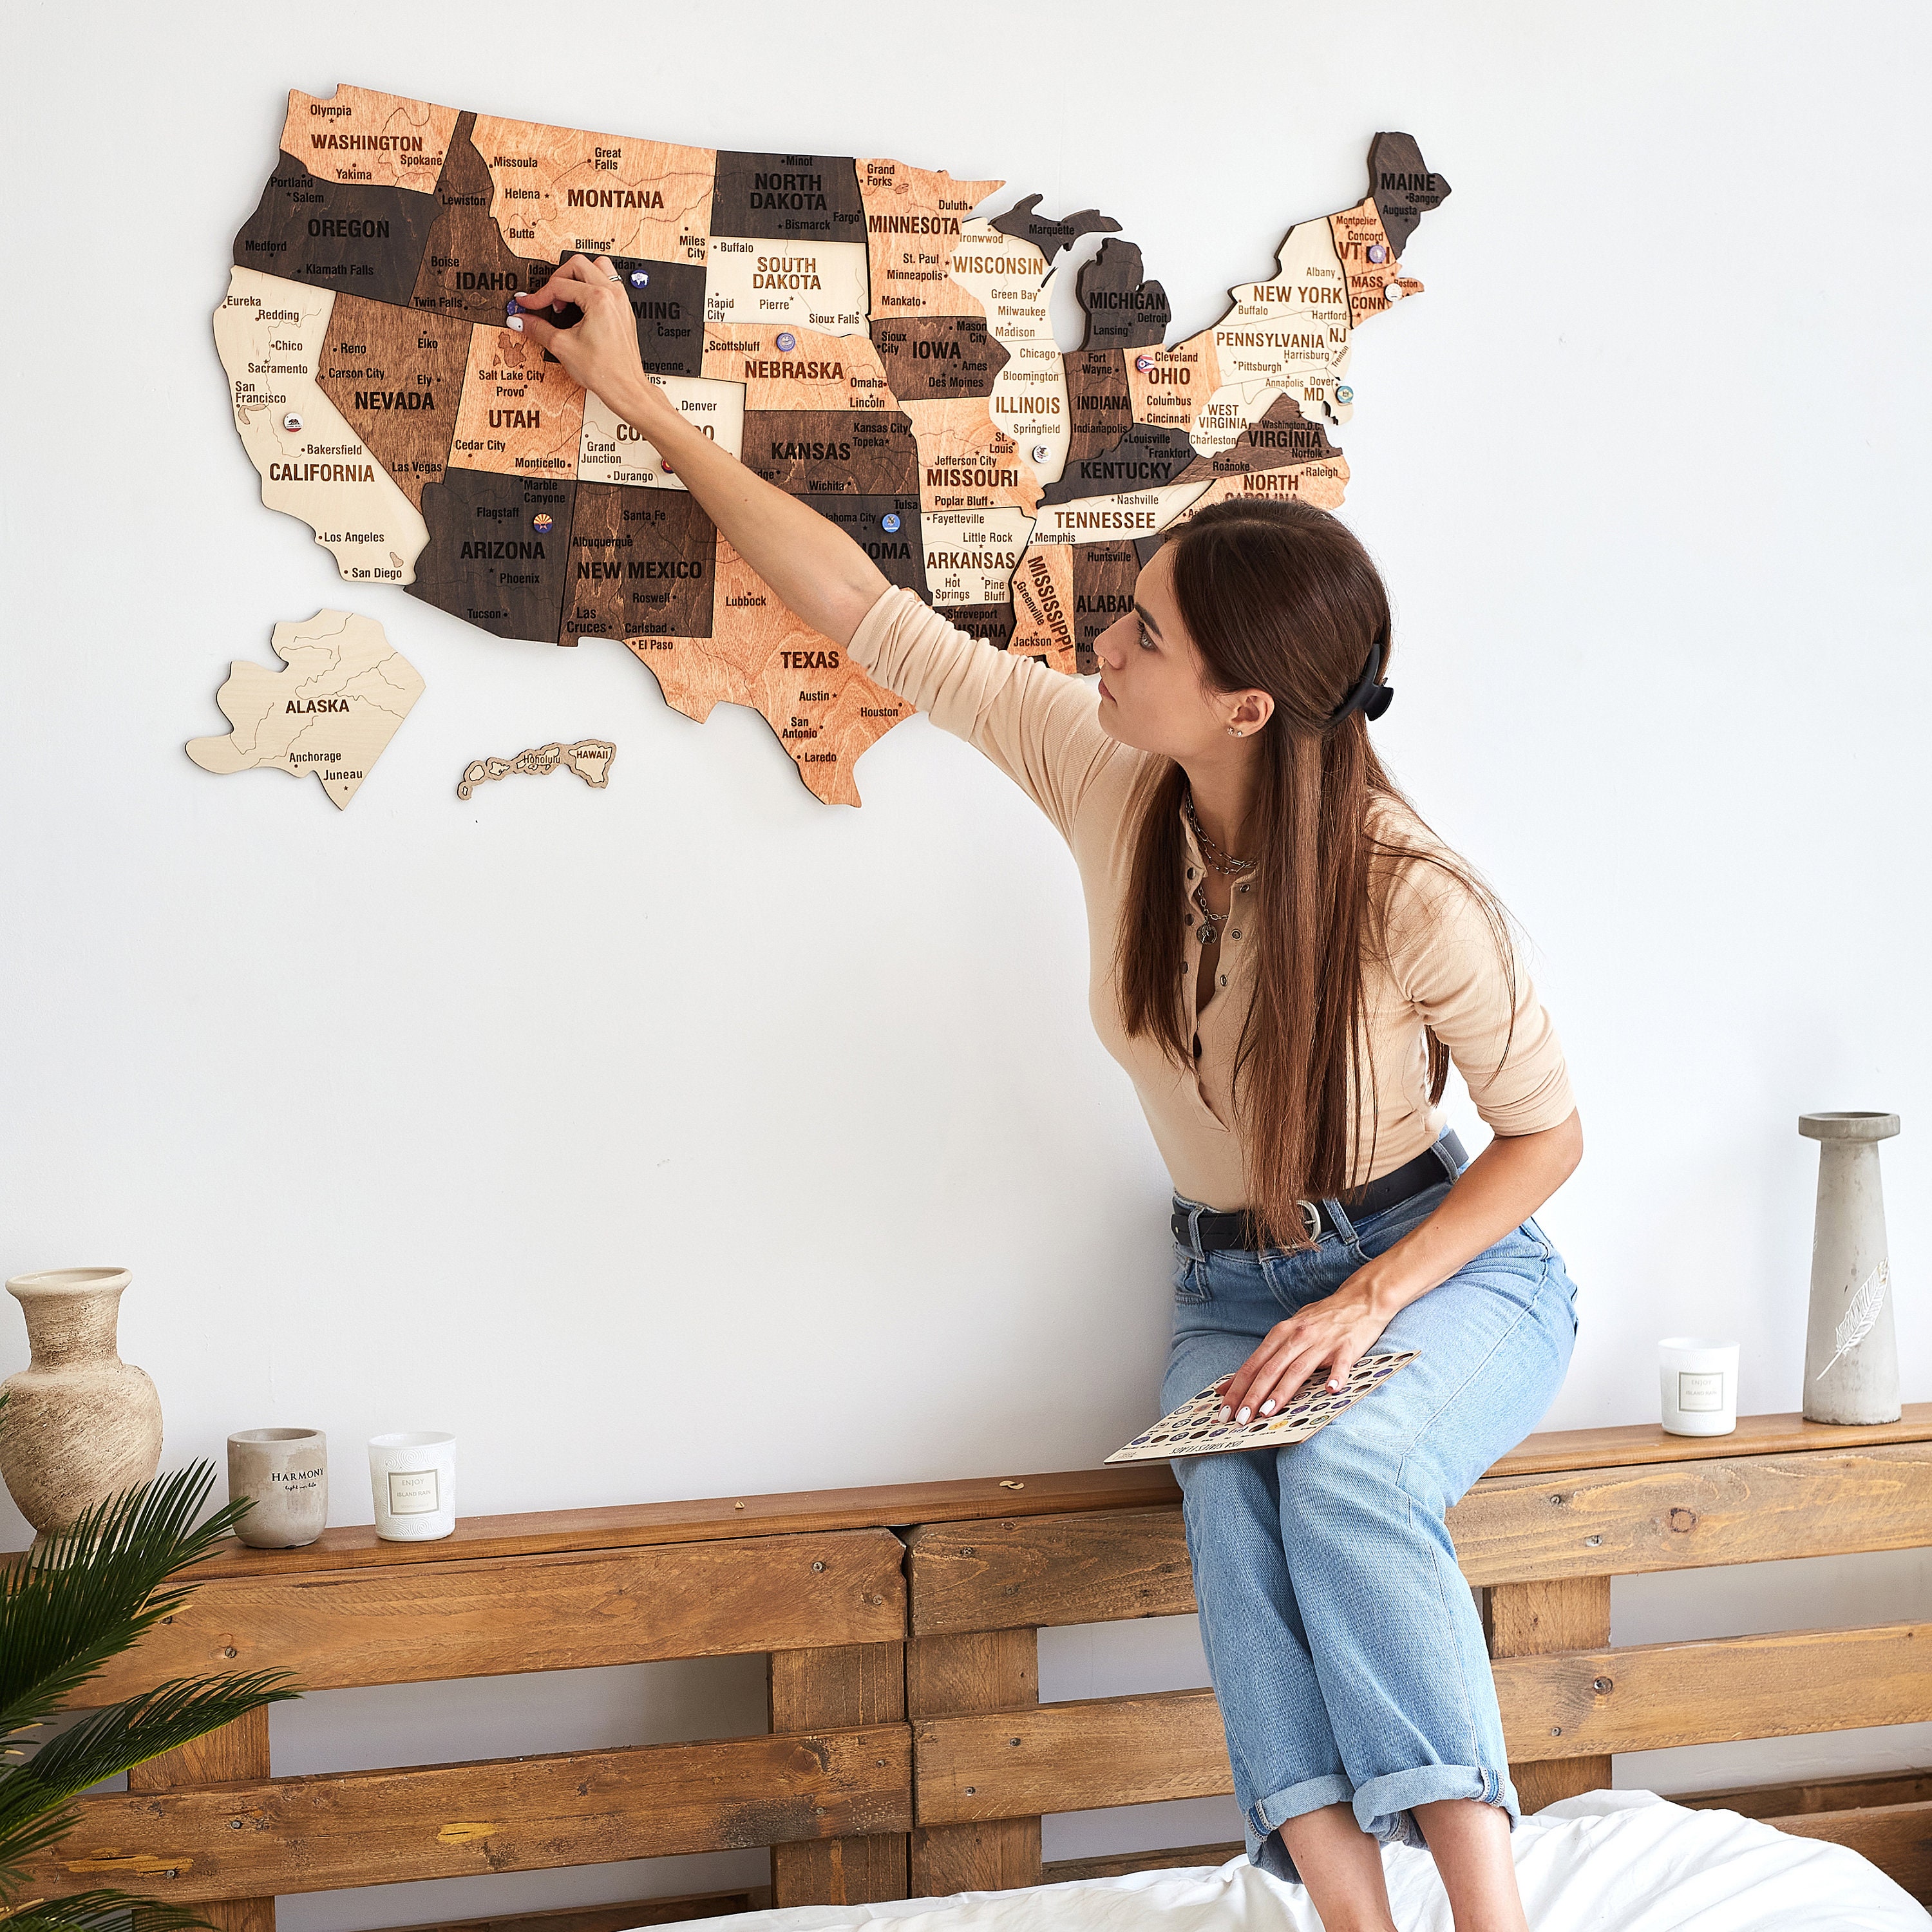 World Map Push Pin, World Map Wall Art, Wooden Travel Map, Cork Board  Apartment Decor, Pin Board Above Bed Decor, 2d Map of the World 